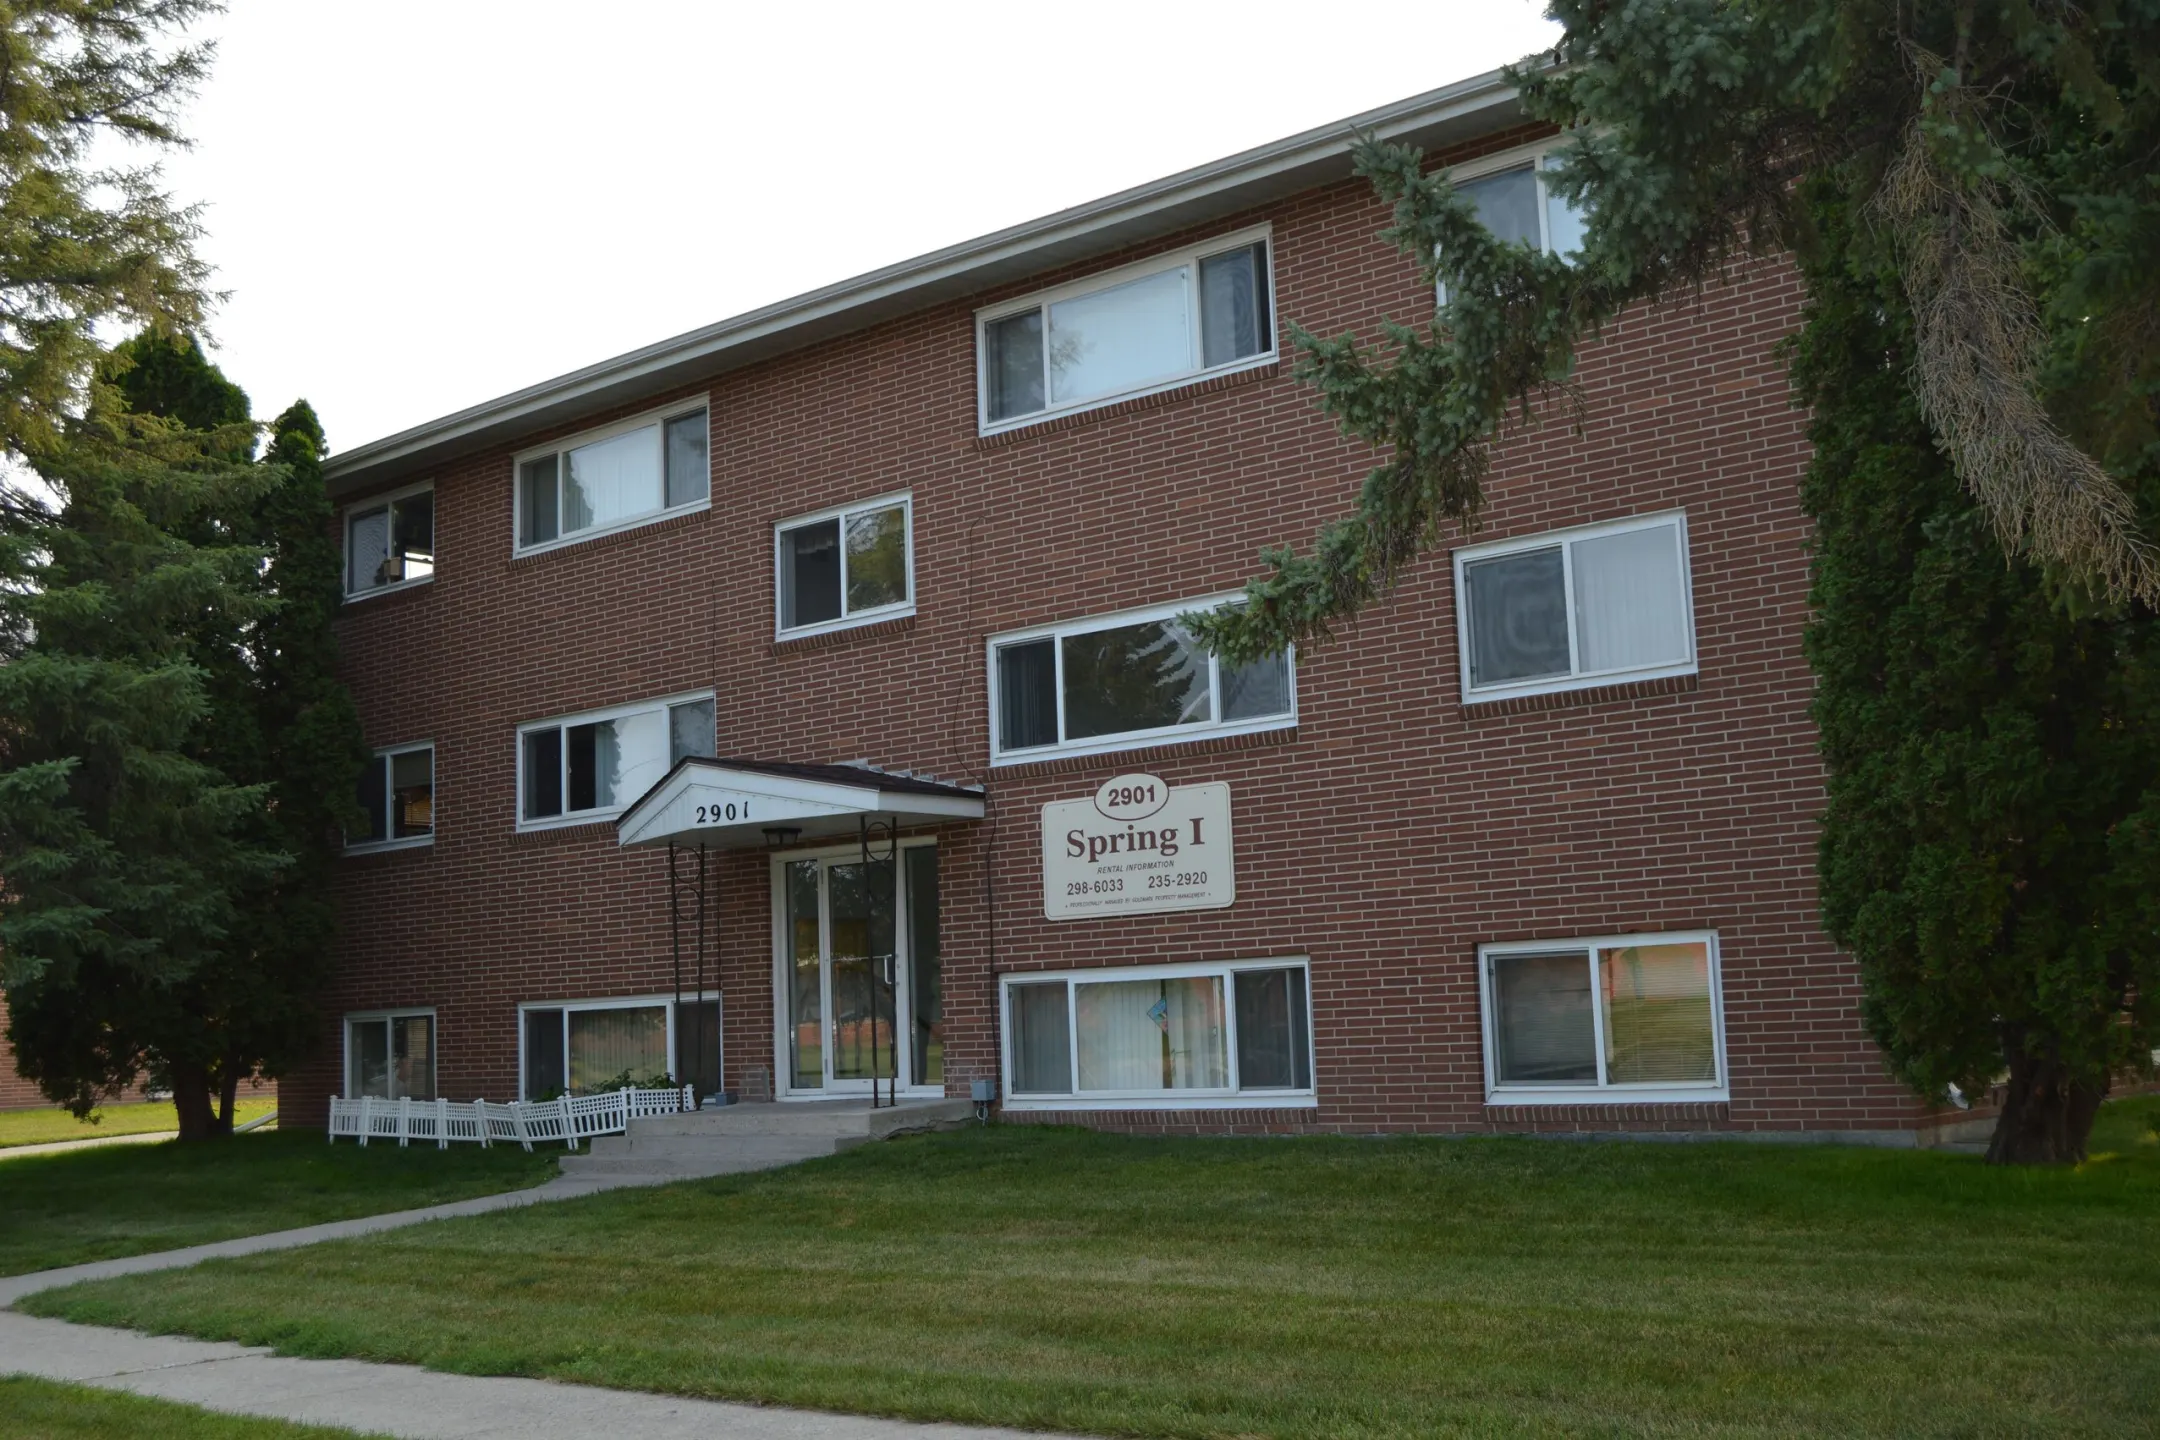 Building - River North Apartments - Fargo, ND